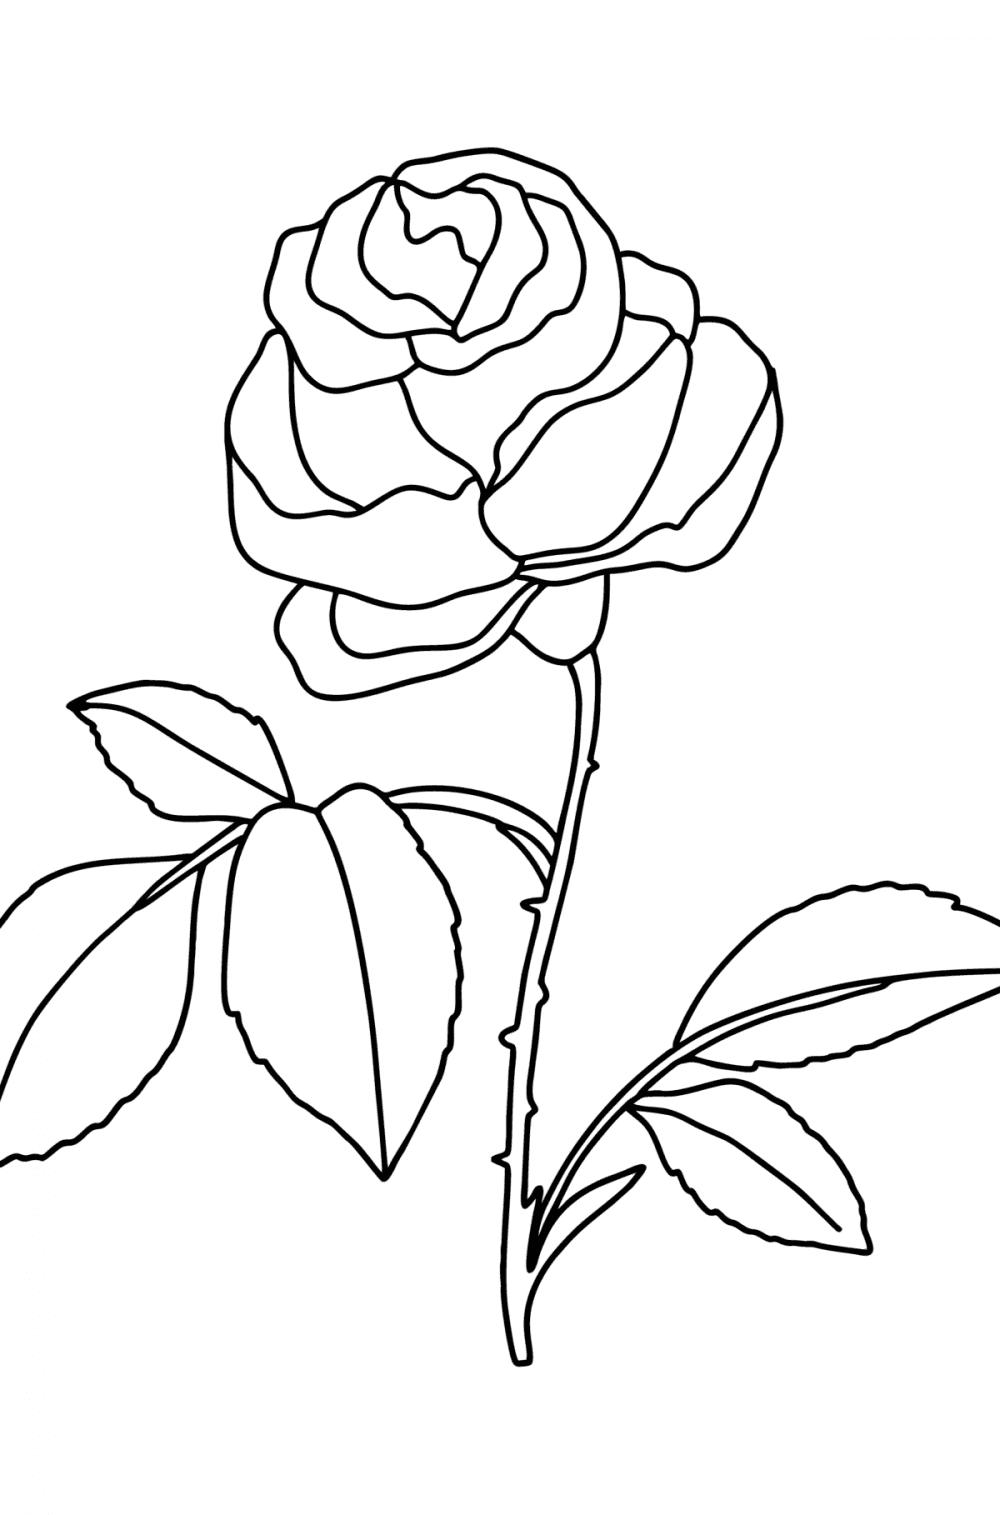 Flowers Coloring Pages for Adults - Print and Online for Free!